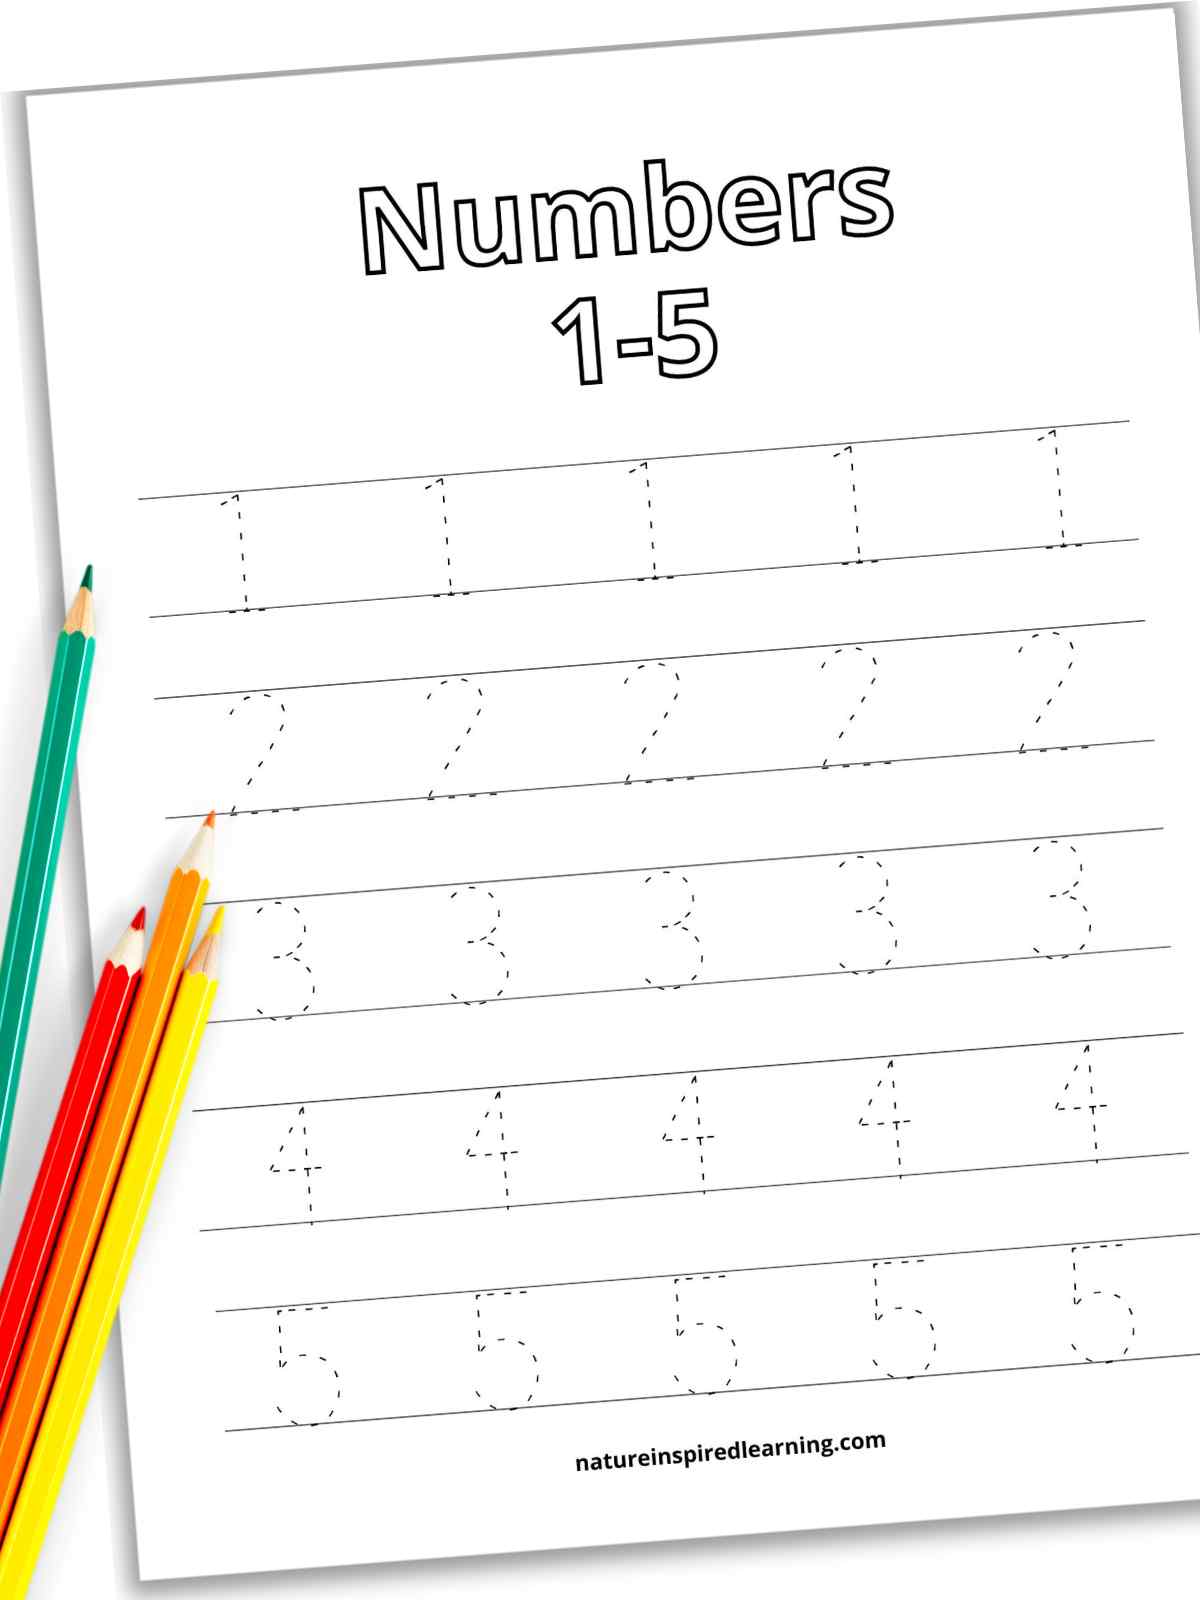 slanted black and white worksheet with five sets of lines with dashed outline of numbers one, two, three, four, and five on the lines. Title across the top and four bright colored pencils on top of the worksheet left side.